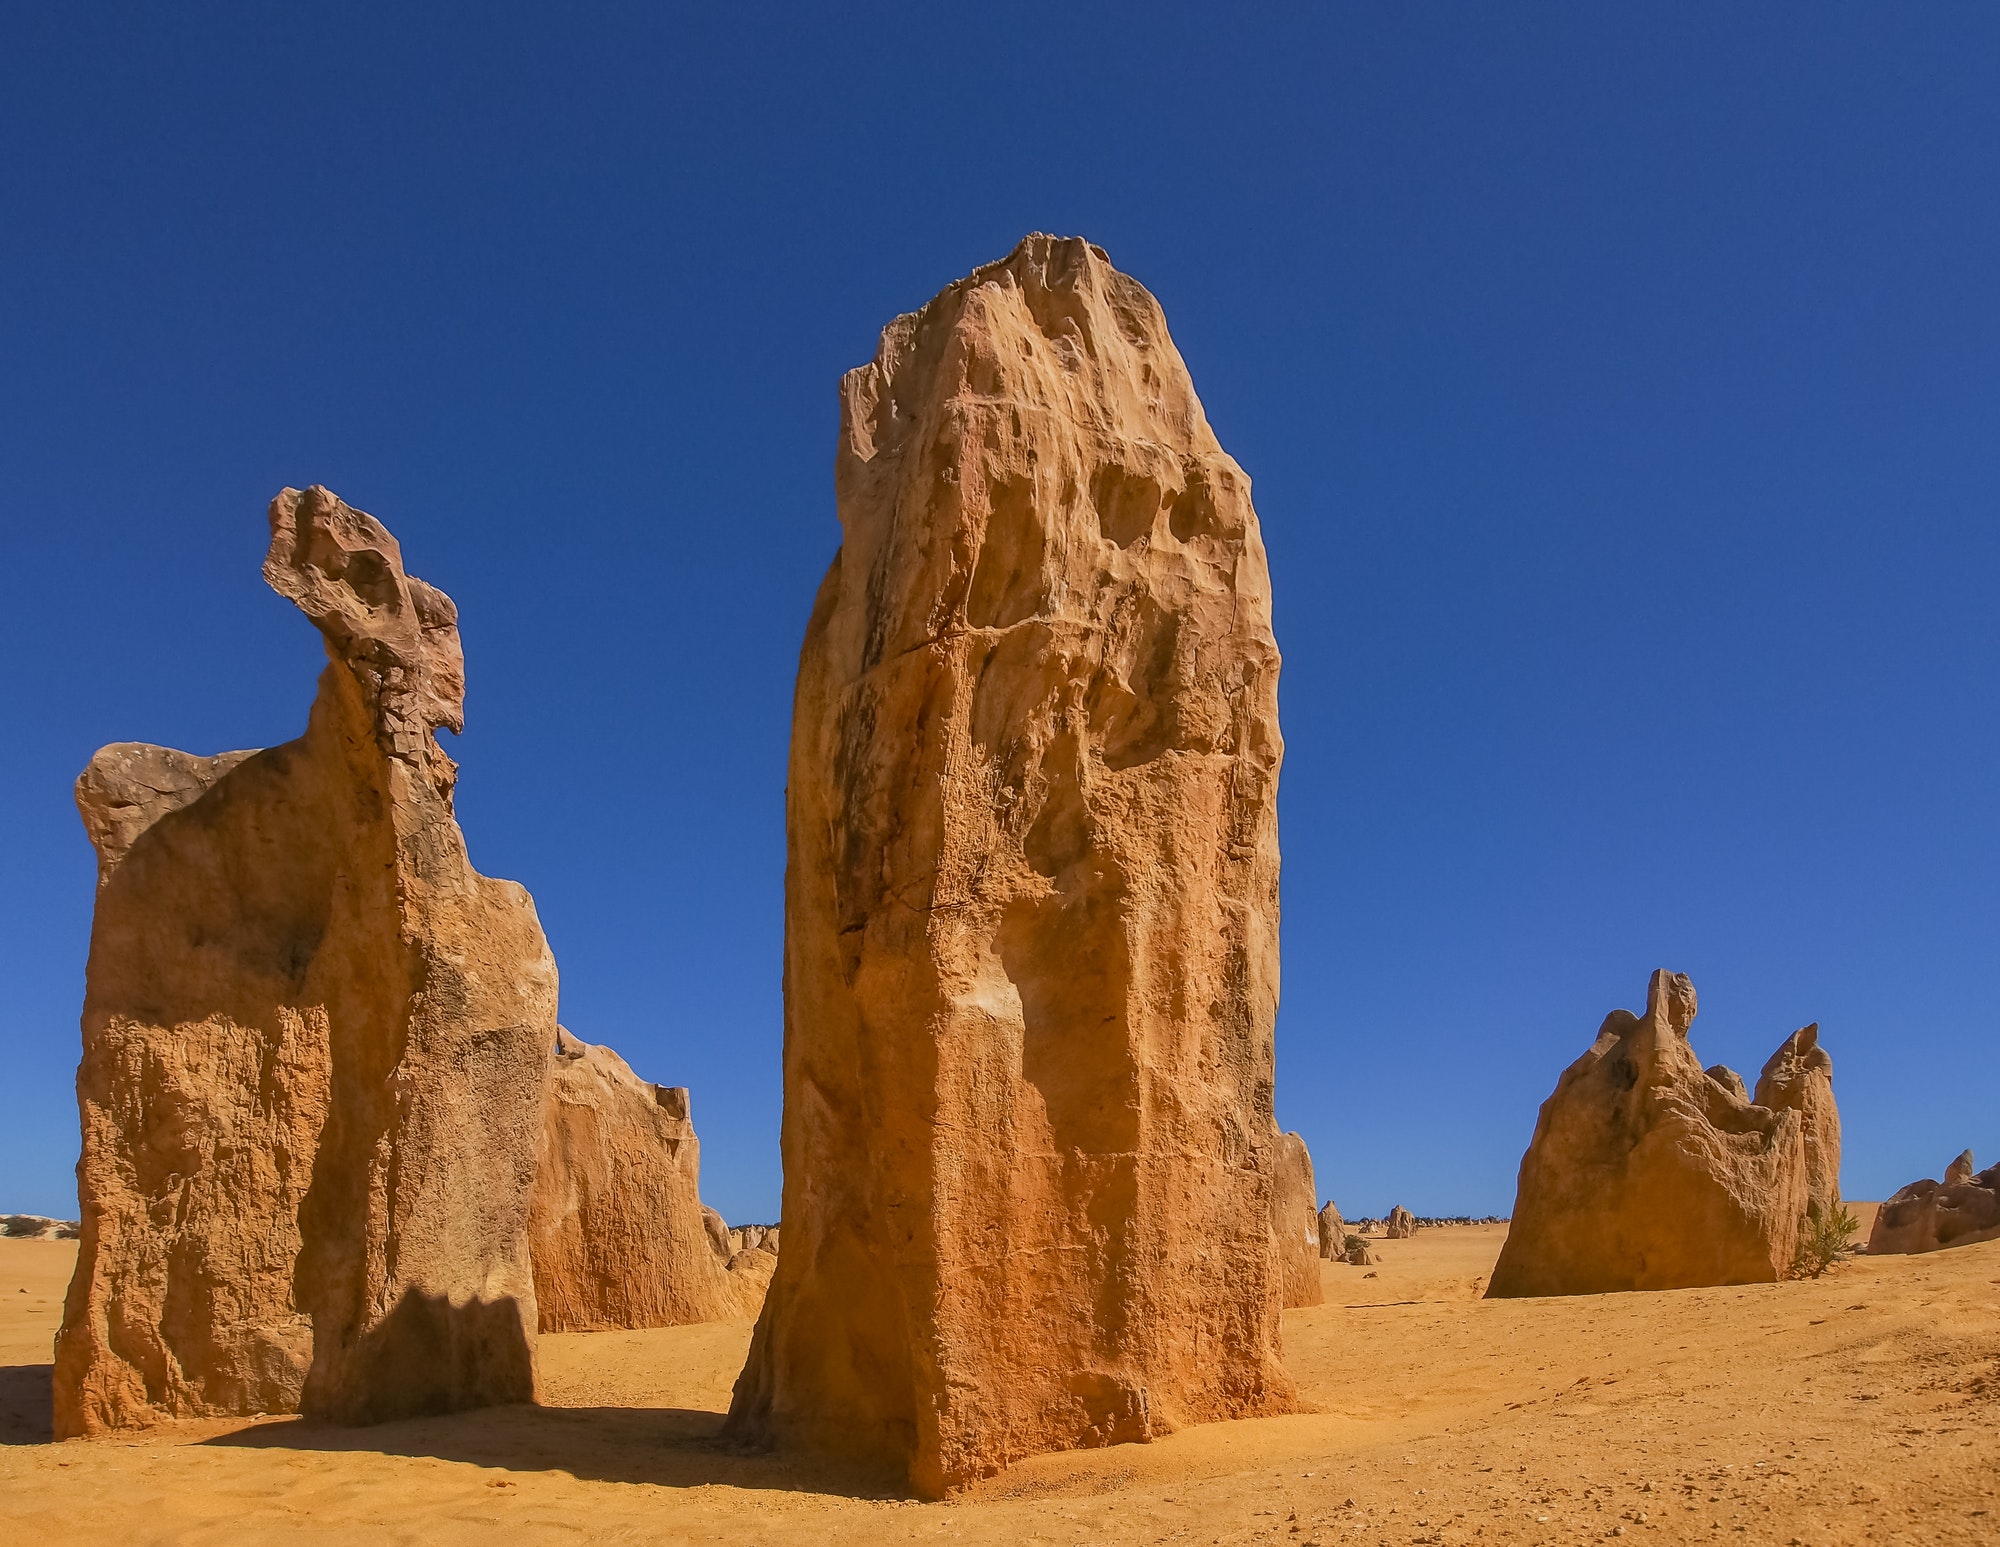 Some of the thousands of incredible rock formations that are The Pinnacles of Western Australia